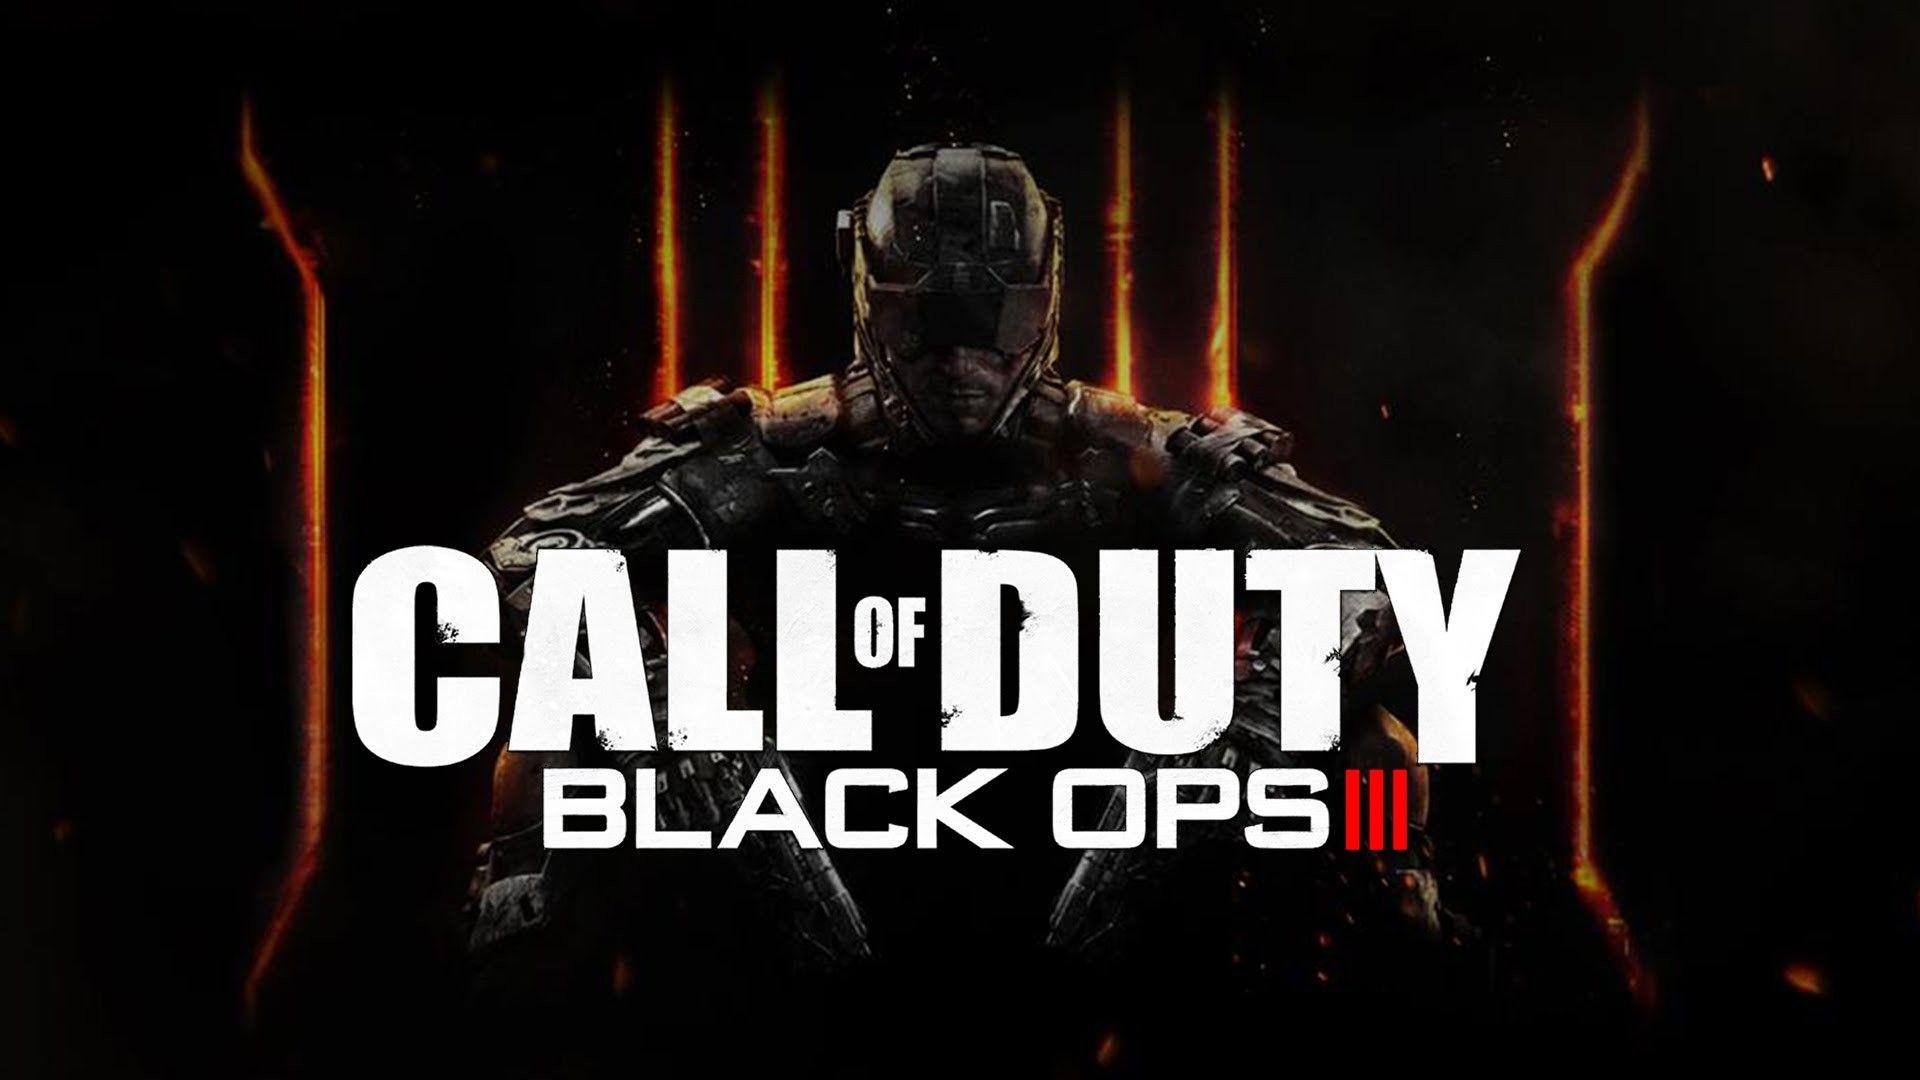 PC Gaming, Video Games, Call Of Duty: Black Ops III Wallpaper HD